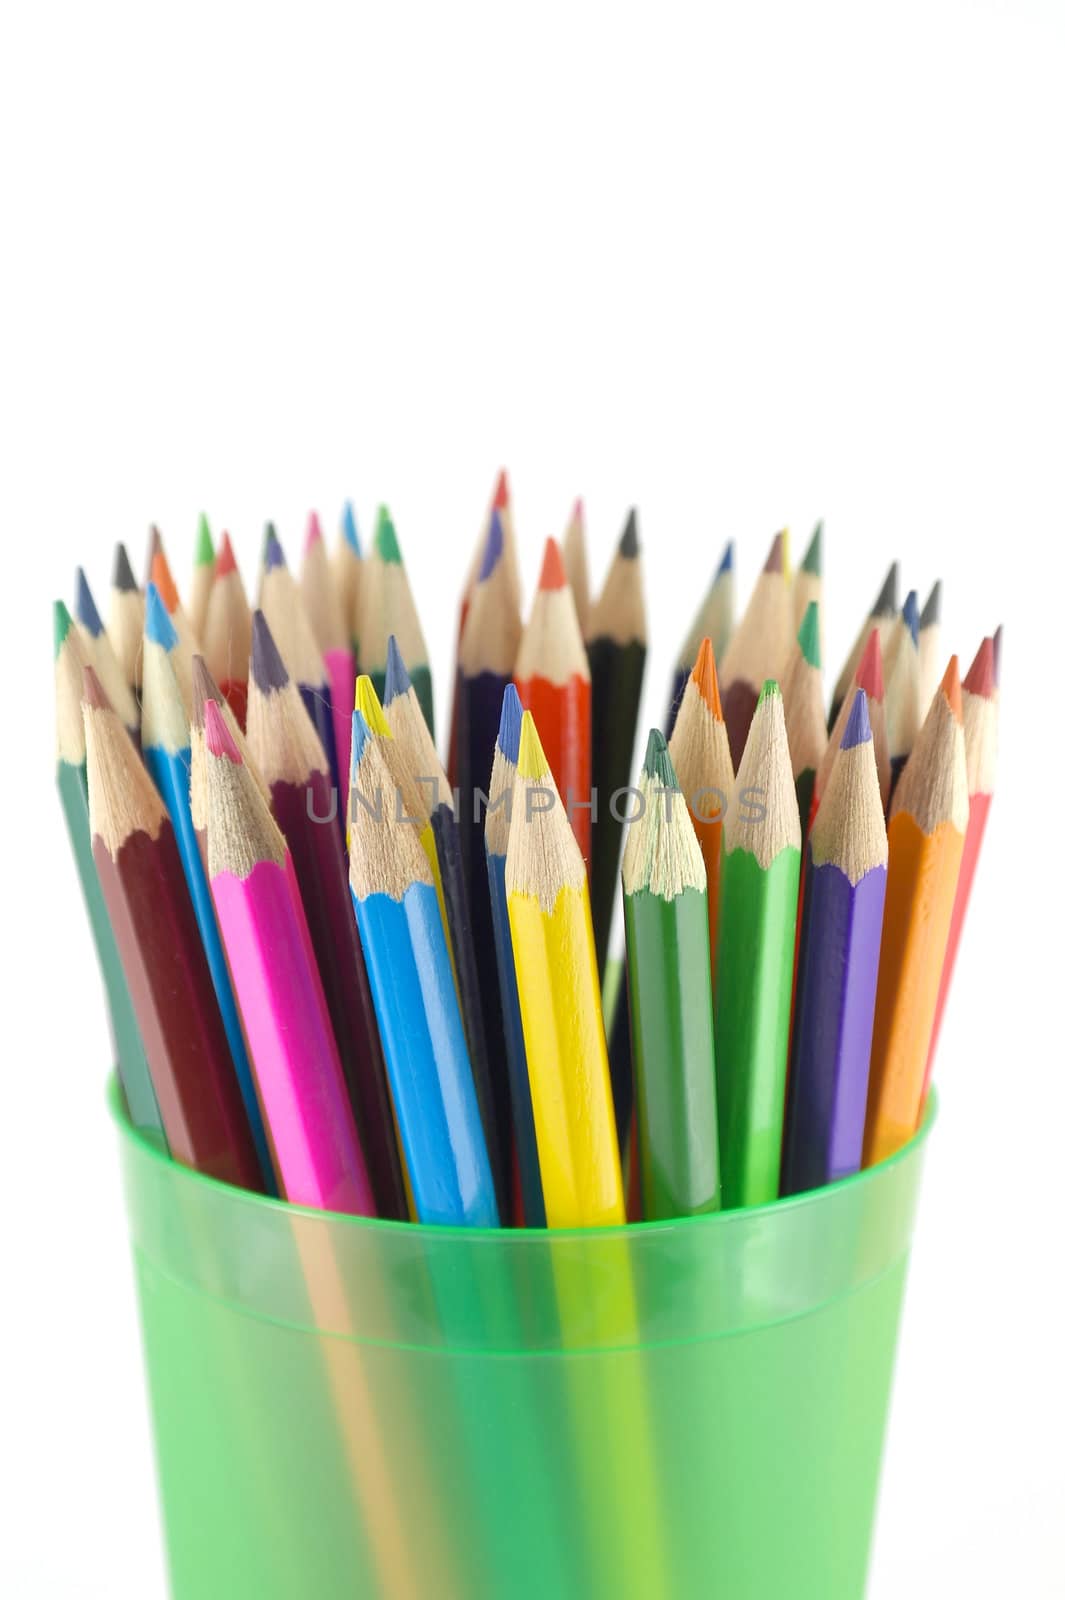 Color pencils in the green prop by sergpet